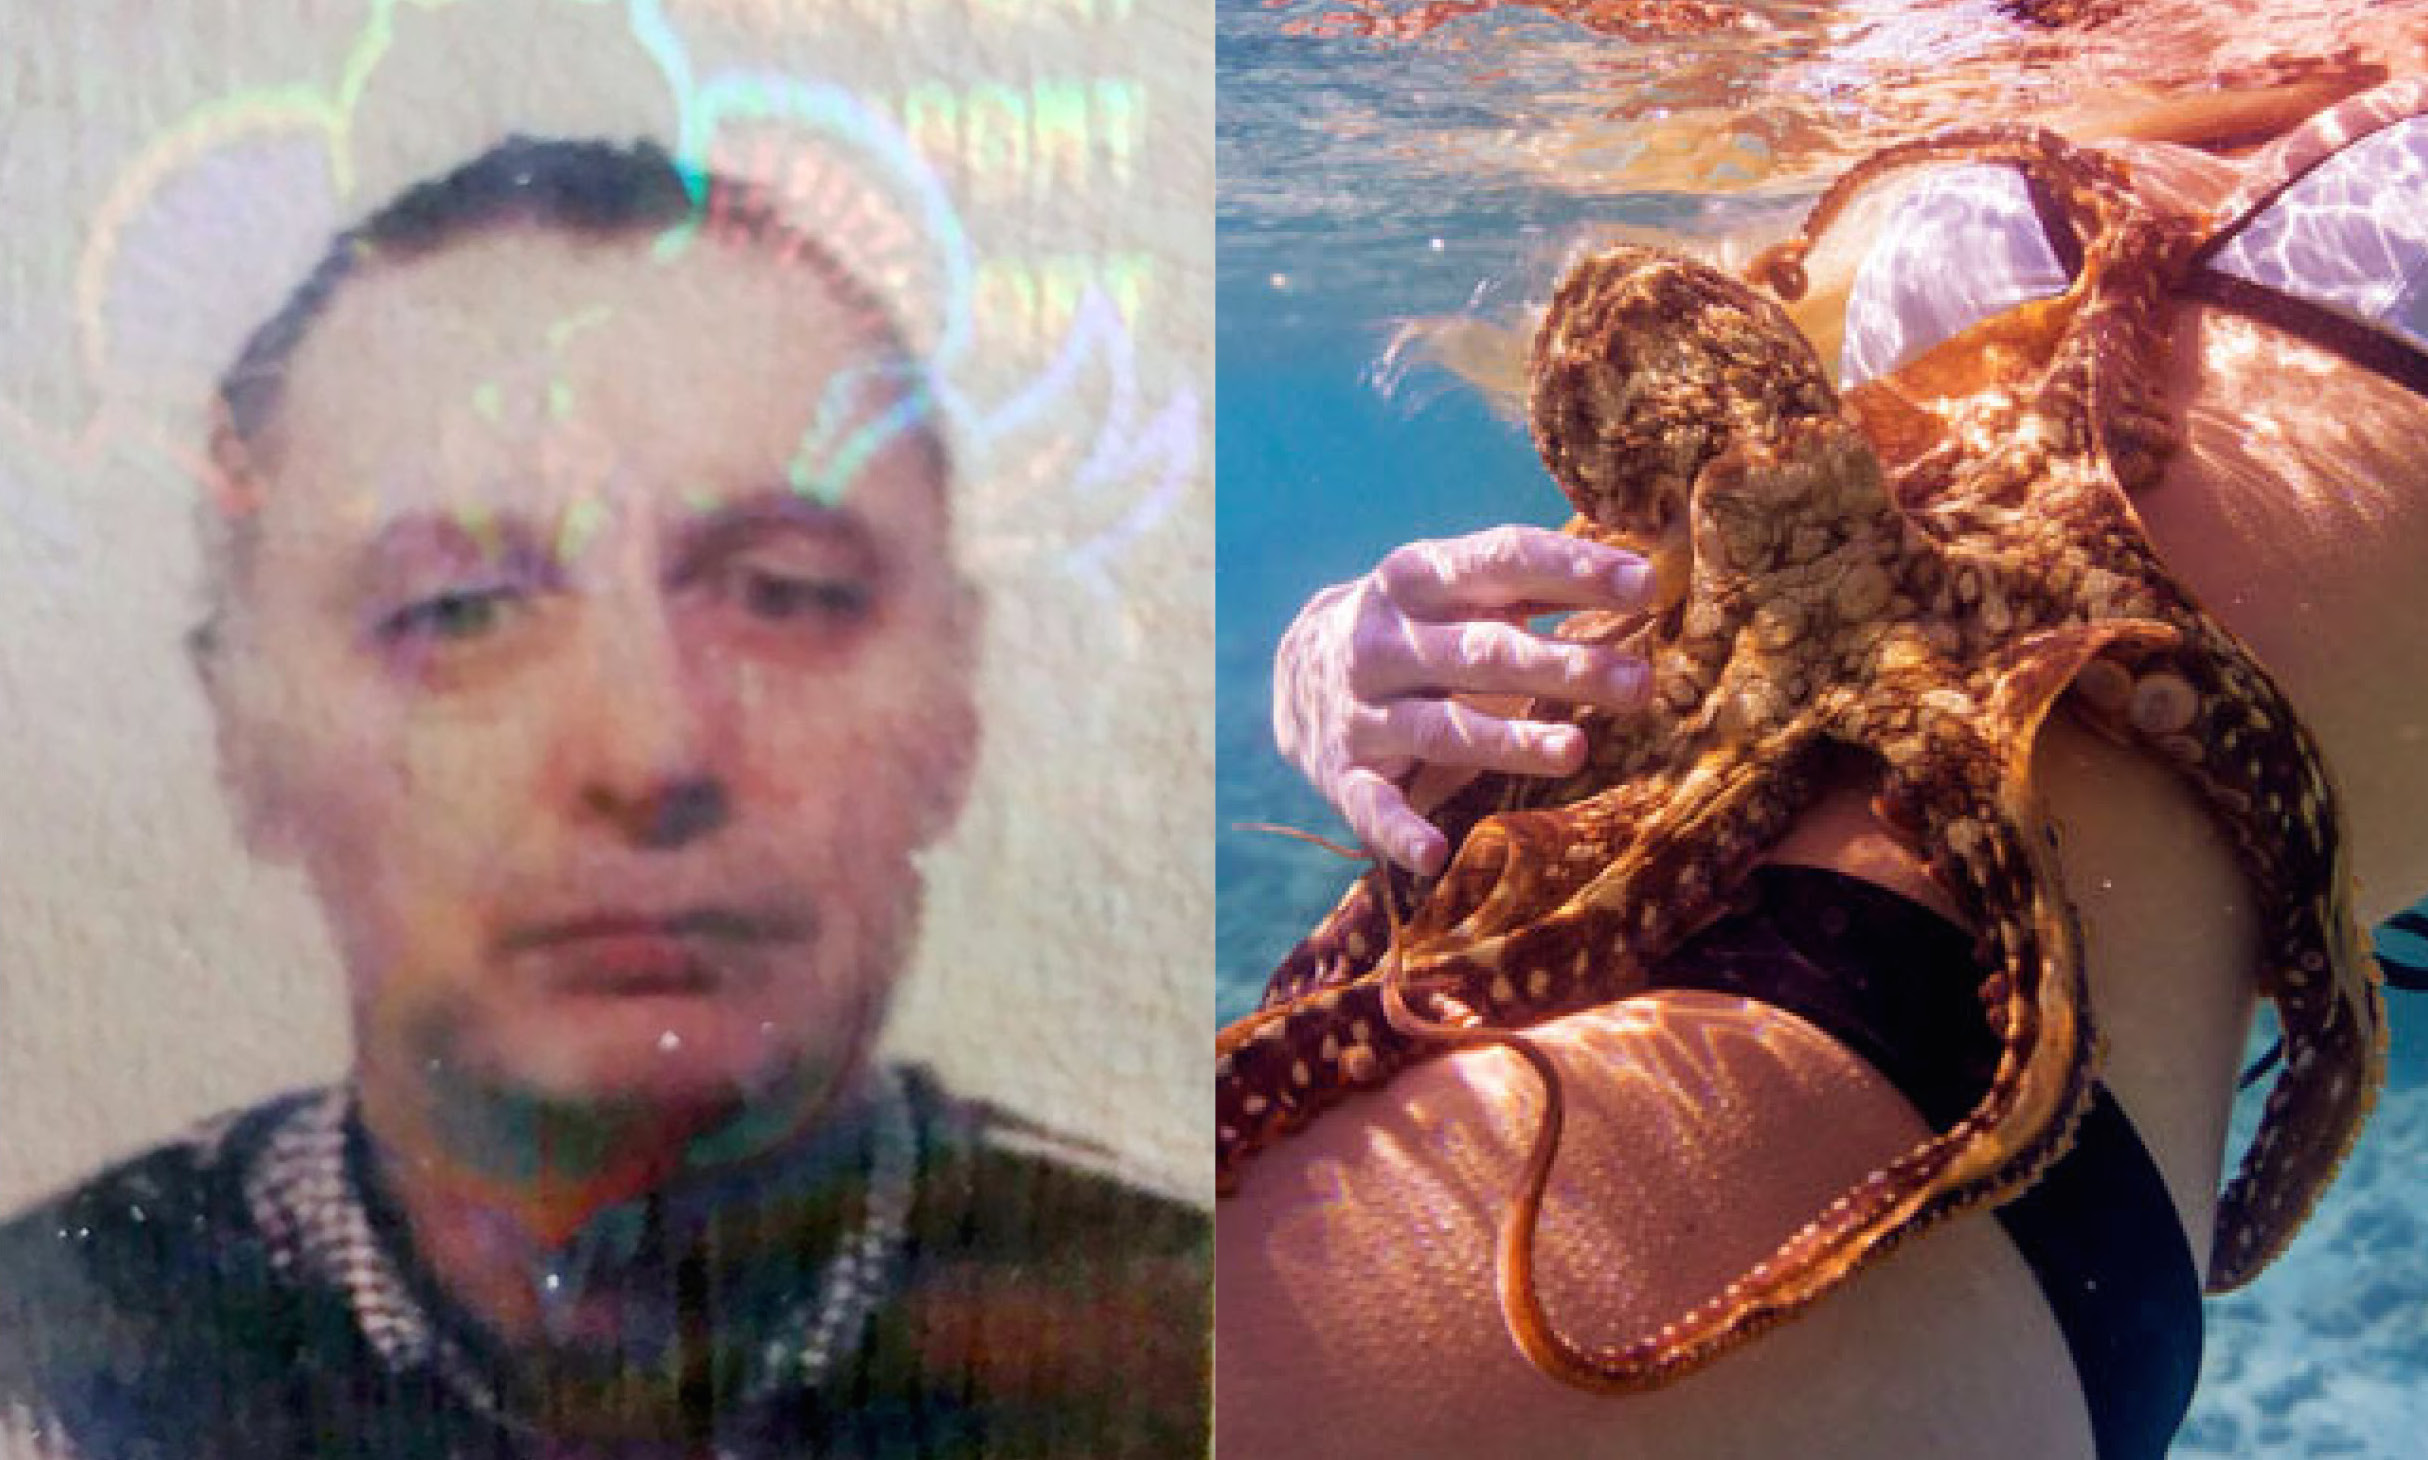 Octopus Sex With Girl - This Man Caught With Extreme Octopus And Child Porn Has Been ...